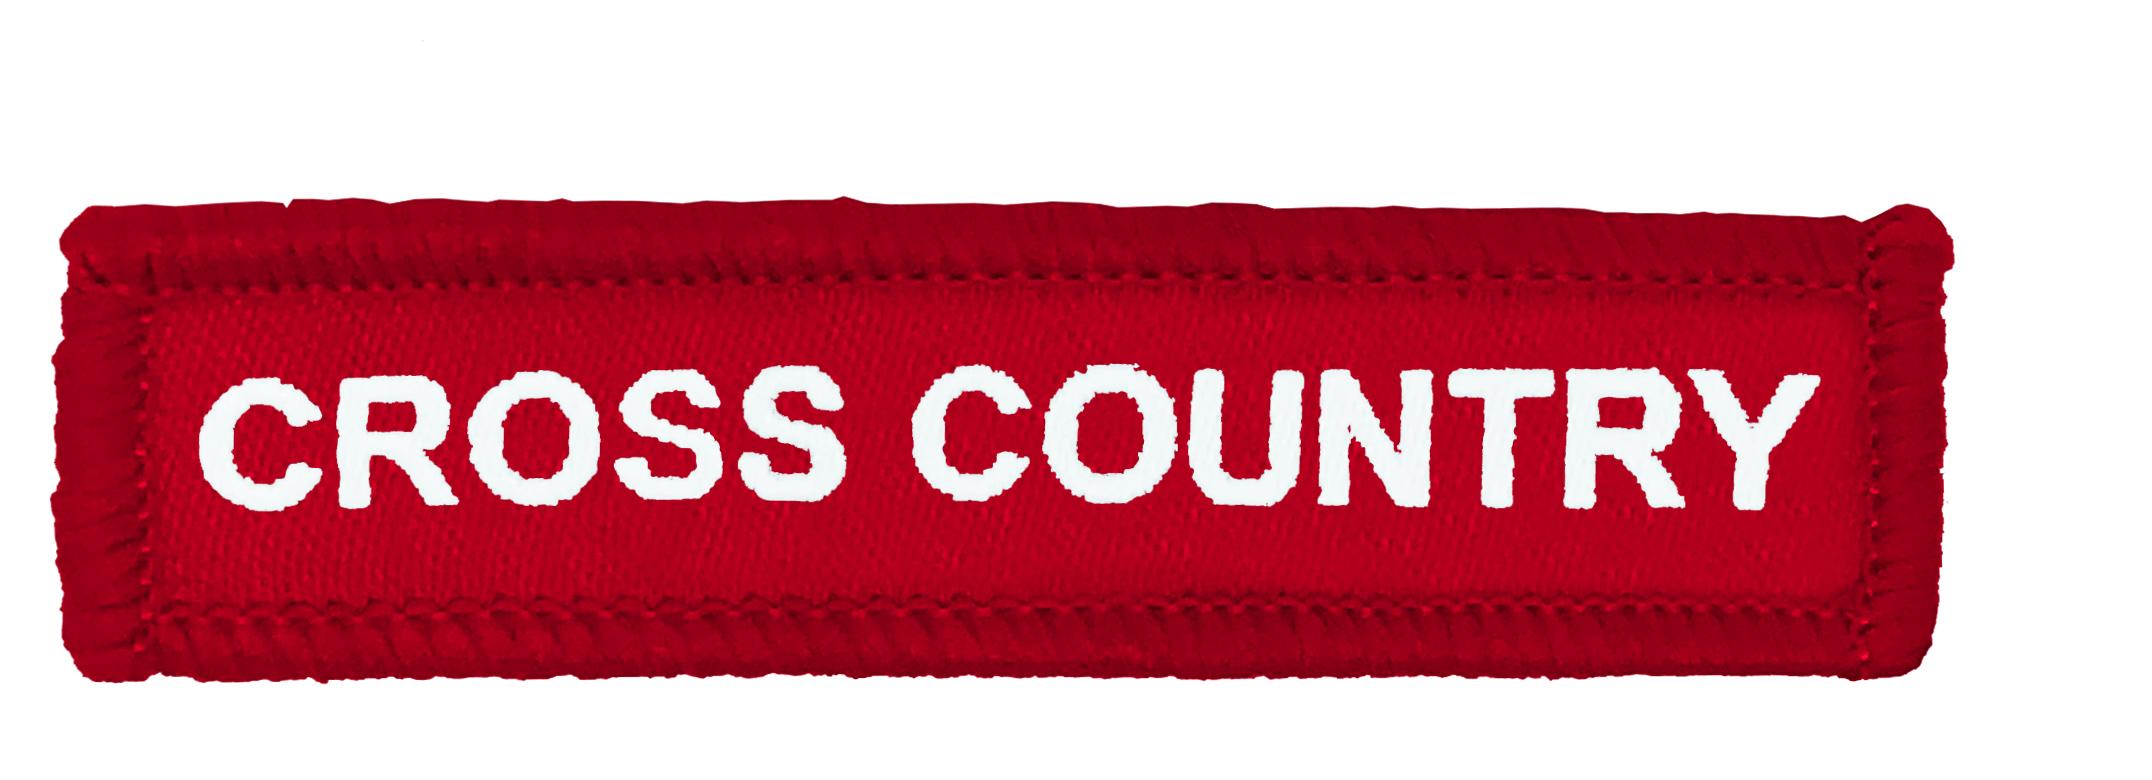 Red Woven Cross Country Badge